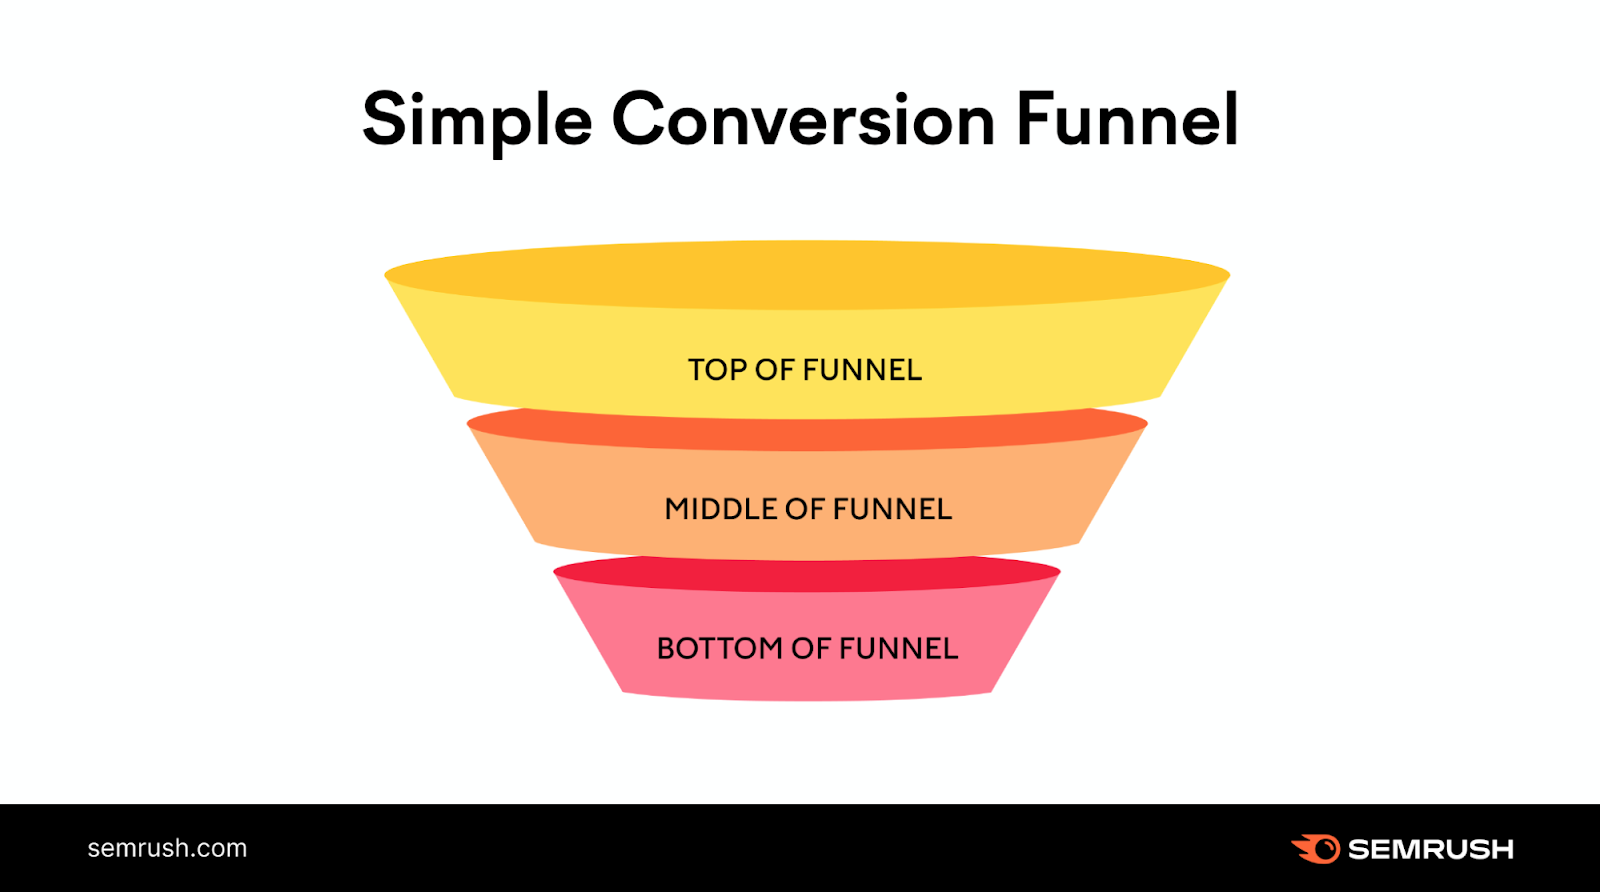 A visual of a simple conversion funnel, with tofu, mofu, and bofu sections